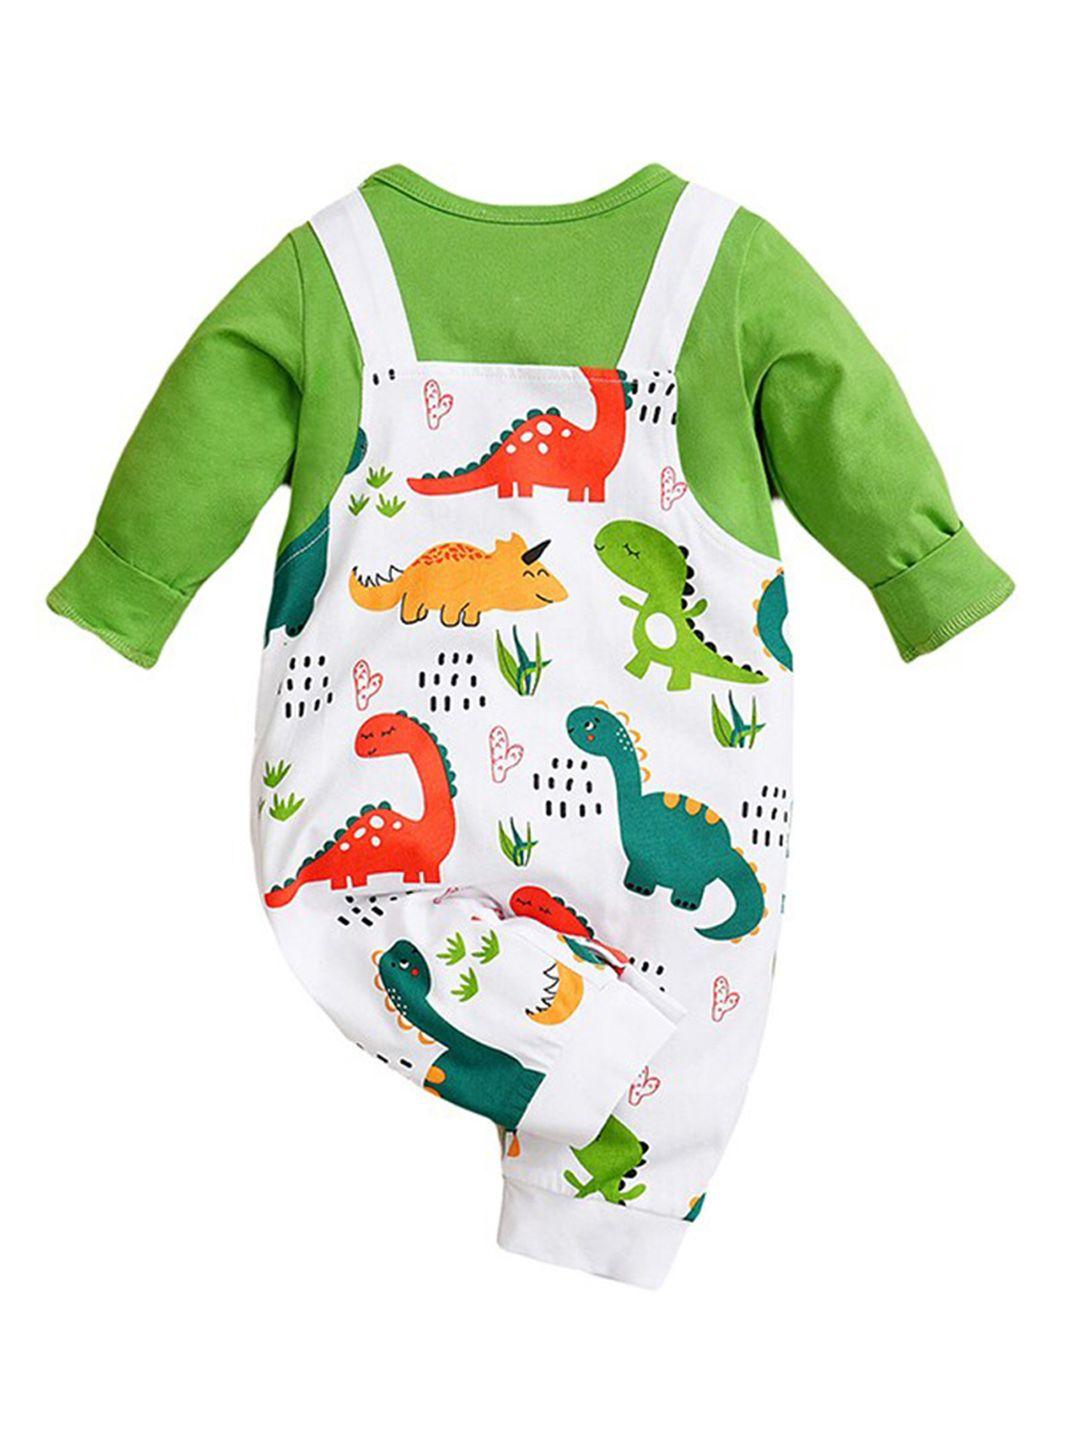 stylecast infants green conversational printed pure cotton rompers